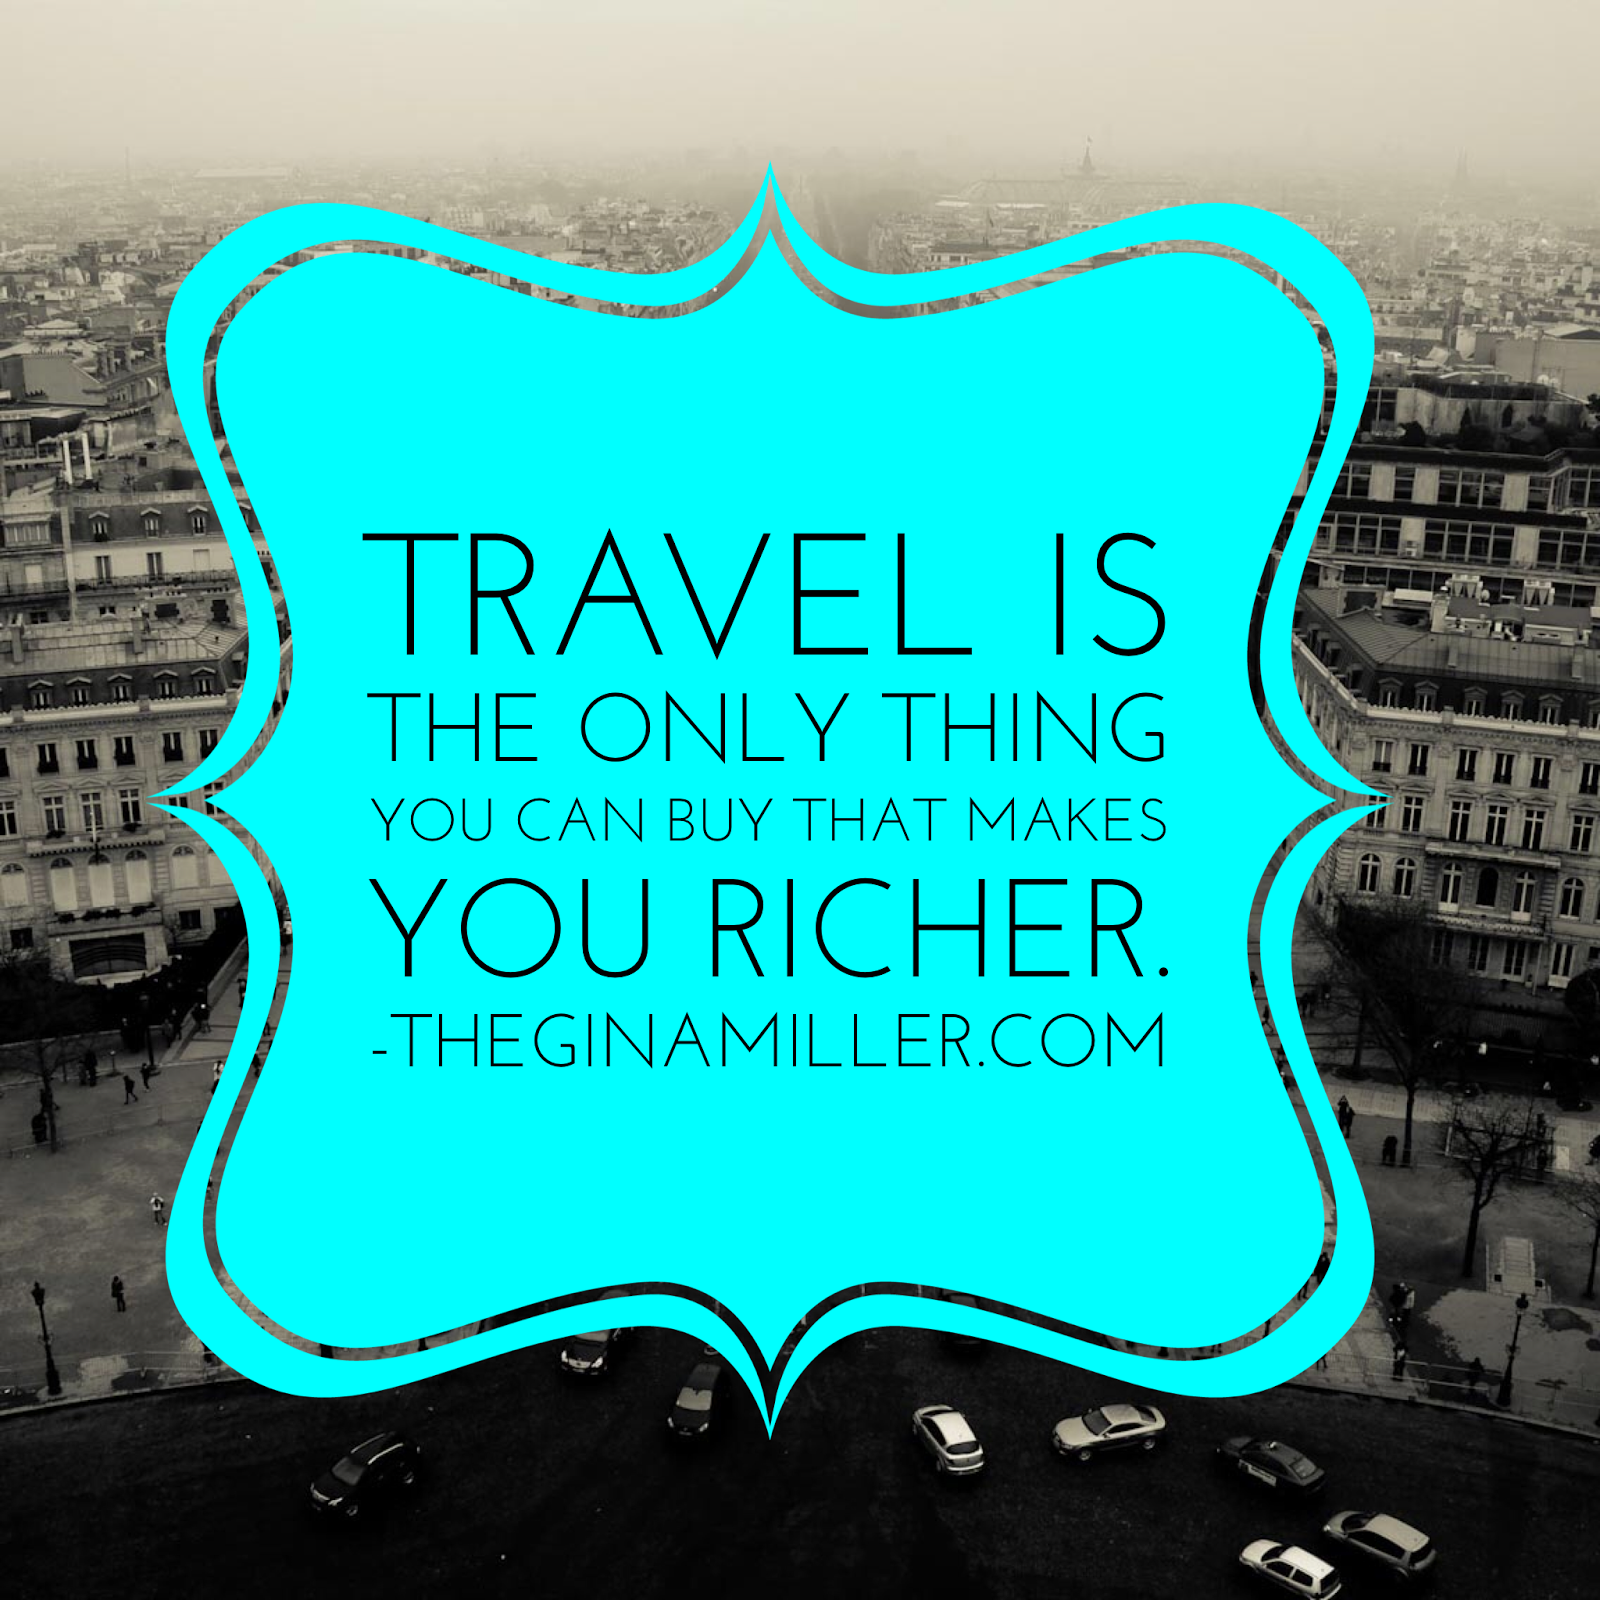 Travel resolutions for 2015, travel is the only thing you buy that makes you richer